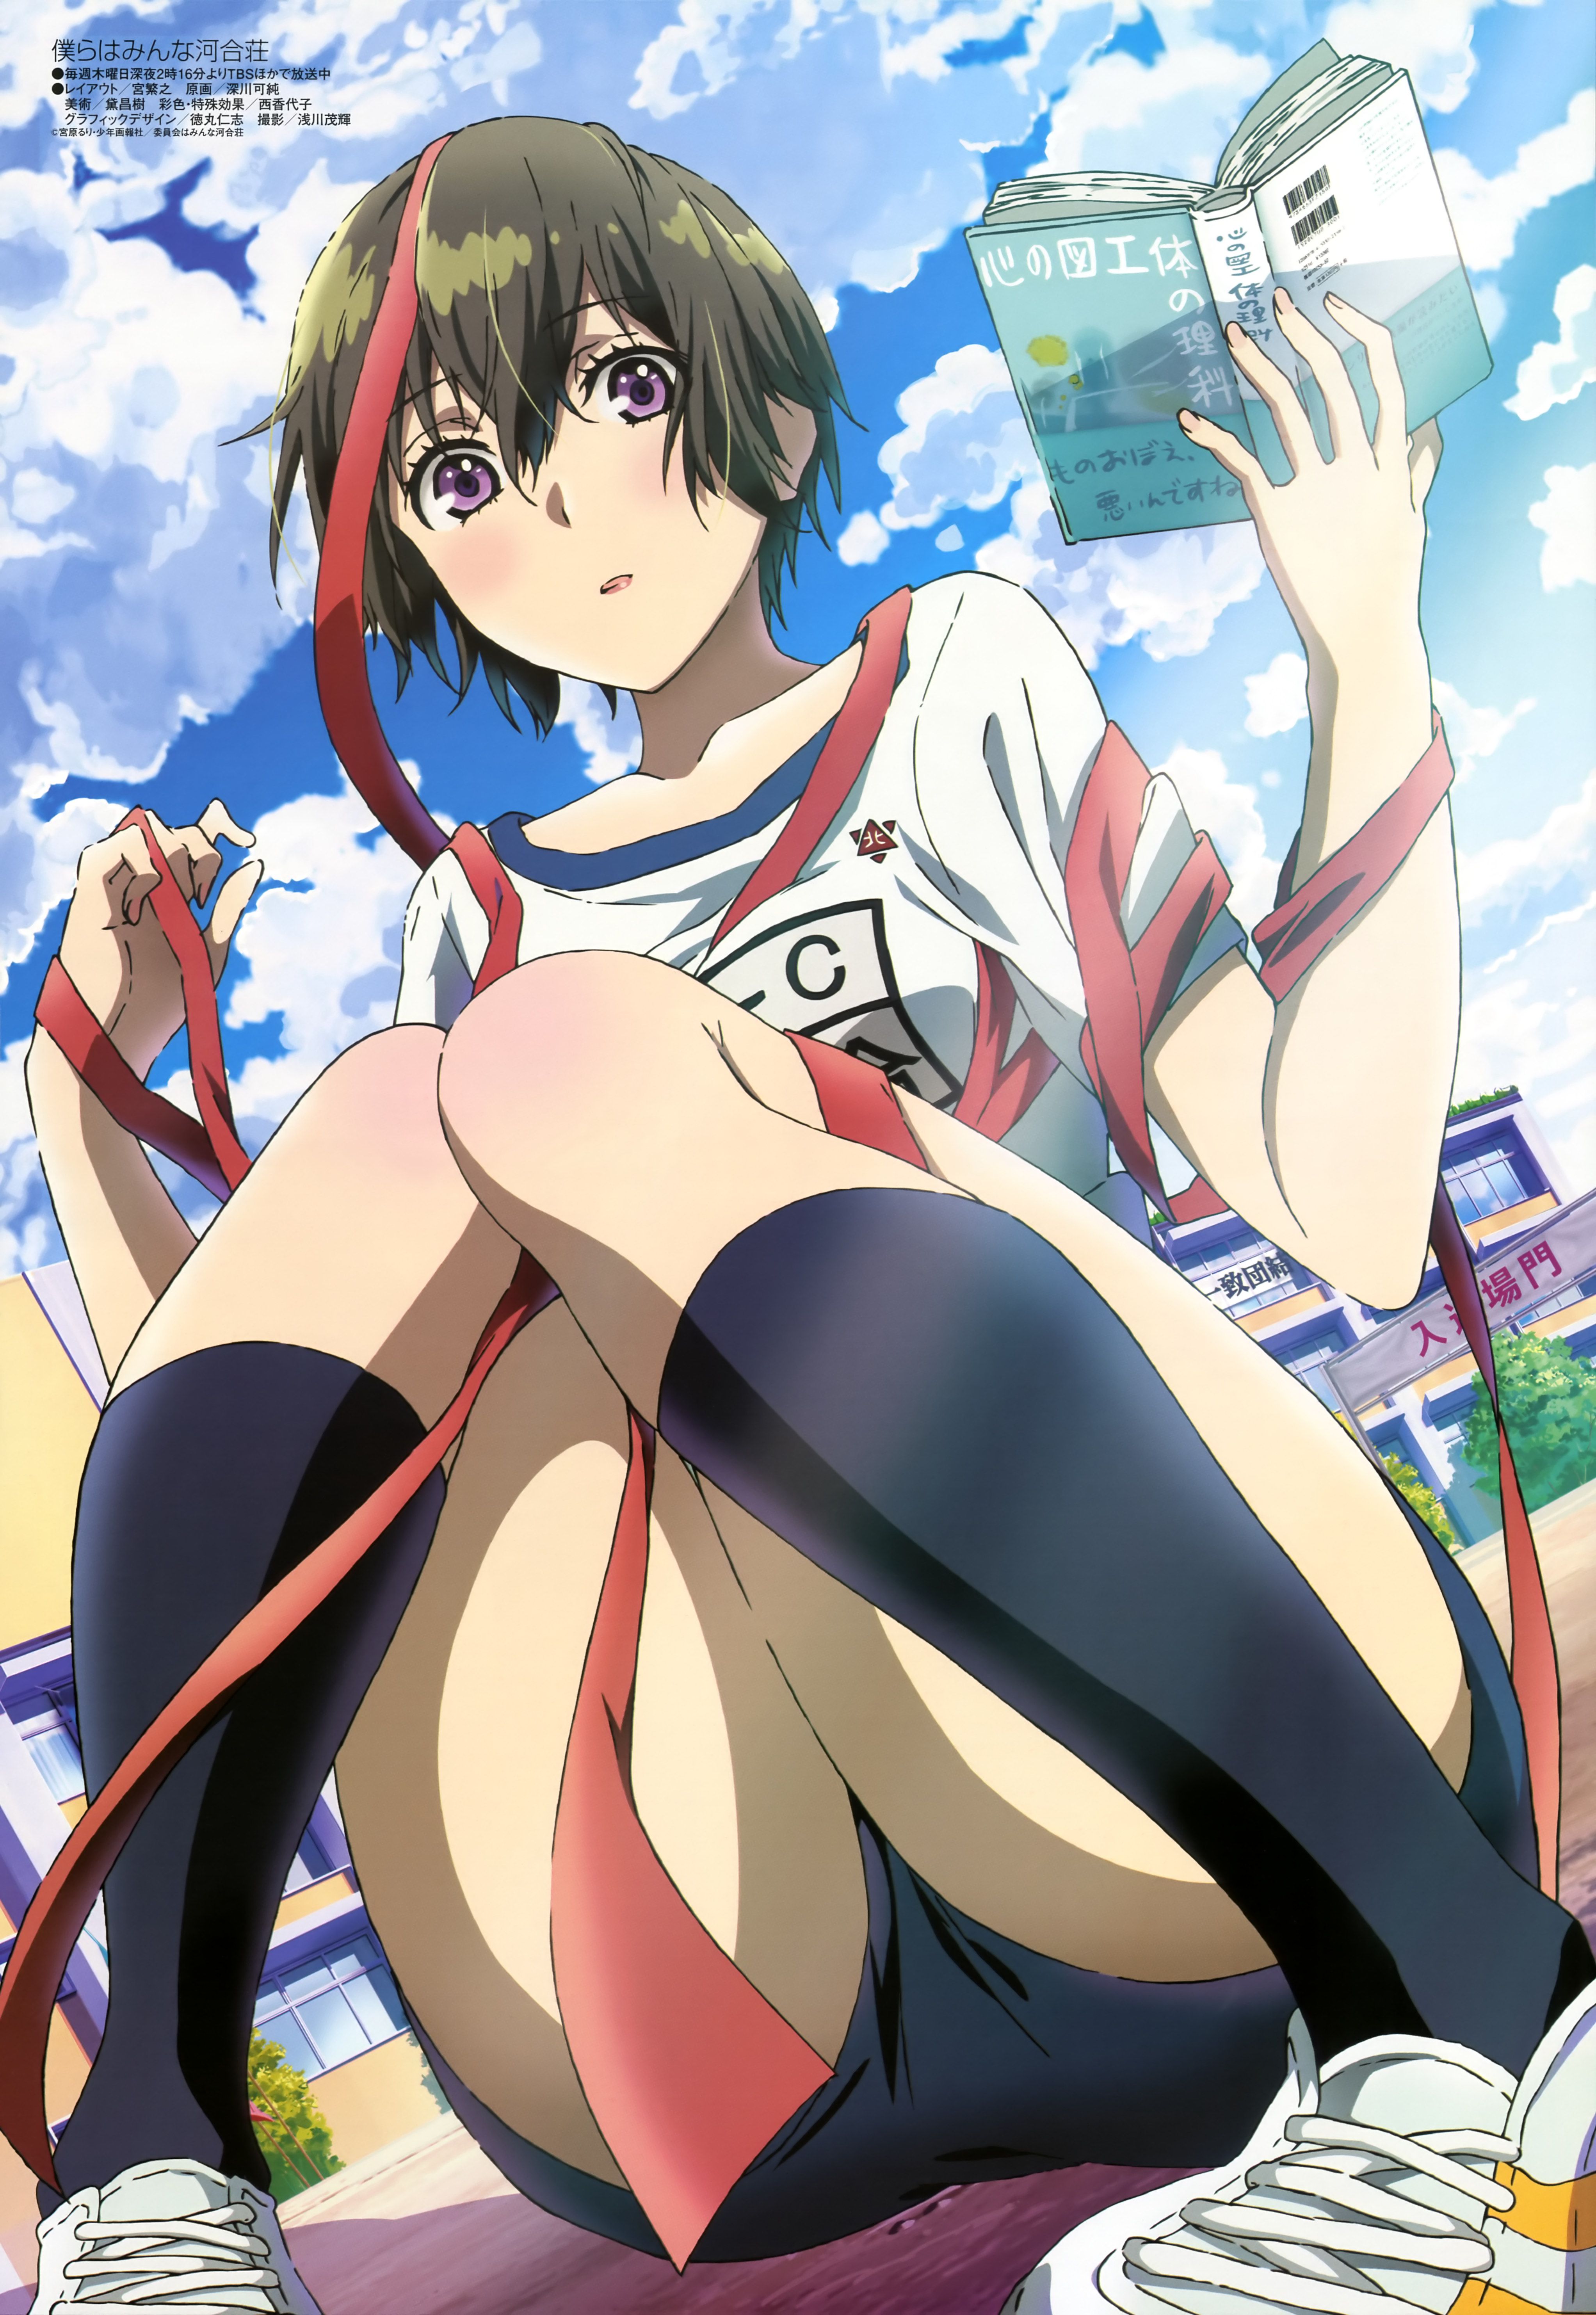 Two-dimensional bloomers picture assortment of Whip whip. vol.37 51